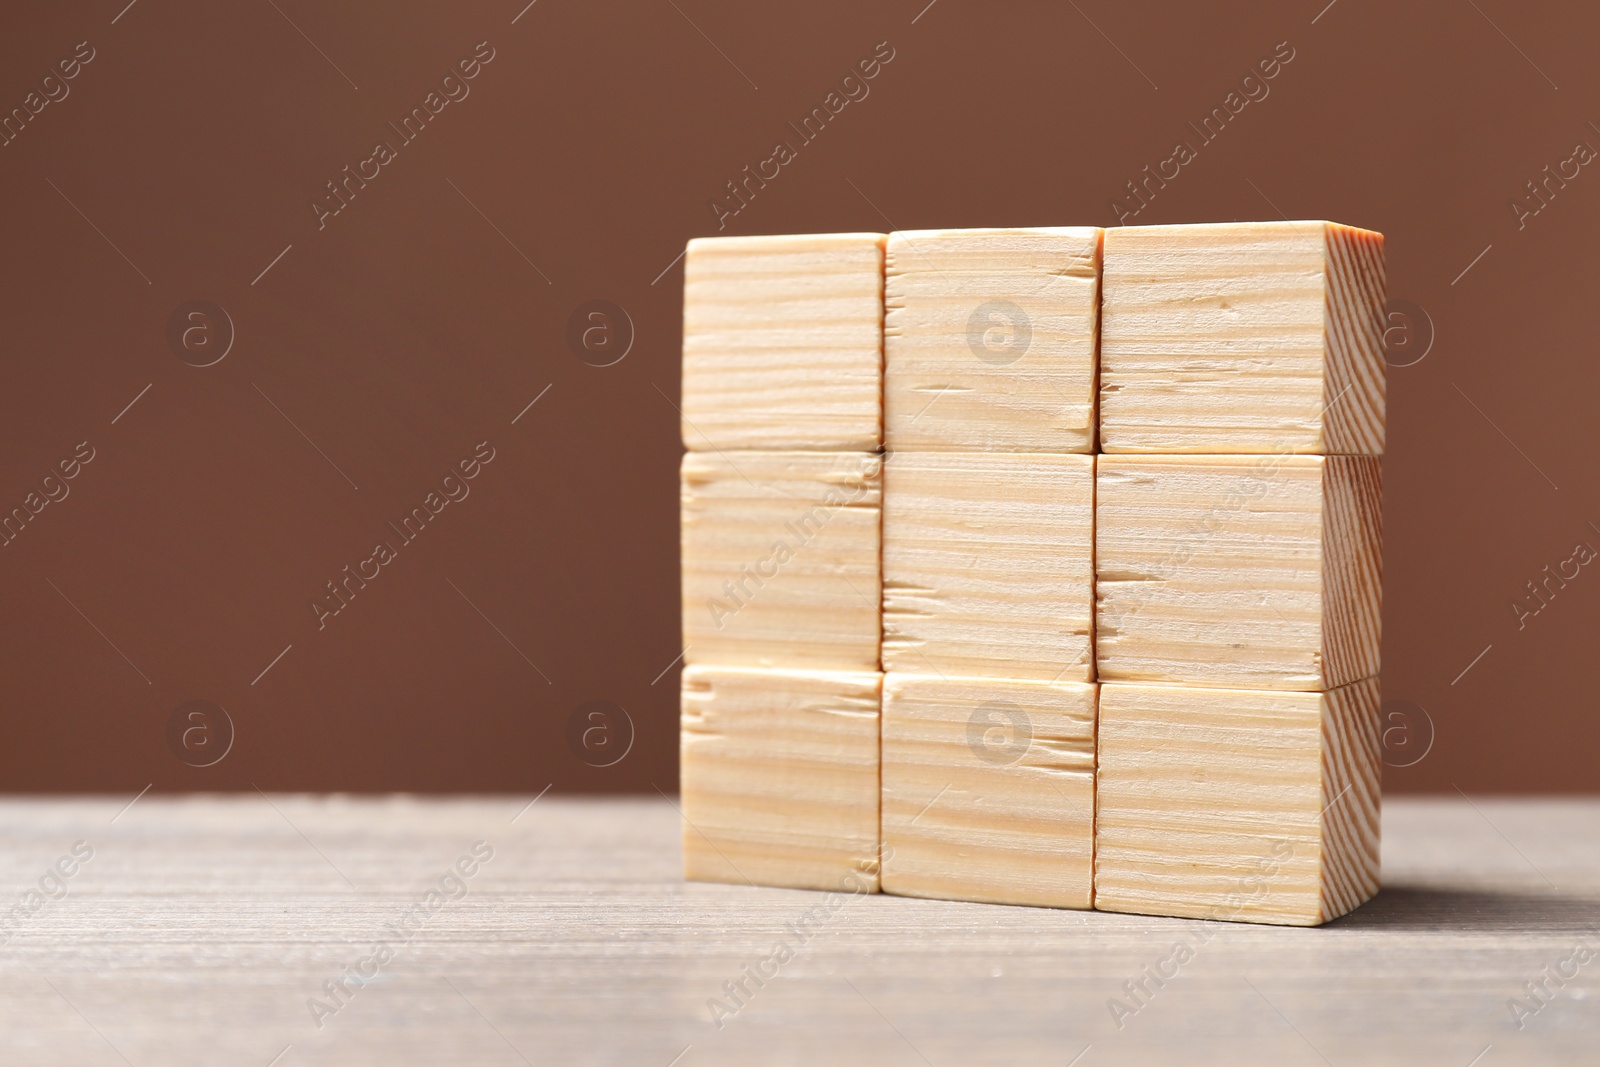 Photo of Blank cubes on wooden table against brown background, space for text